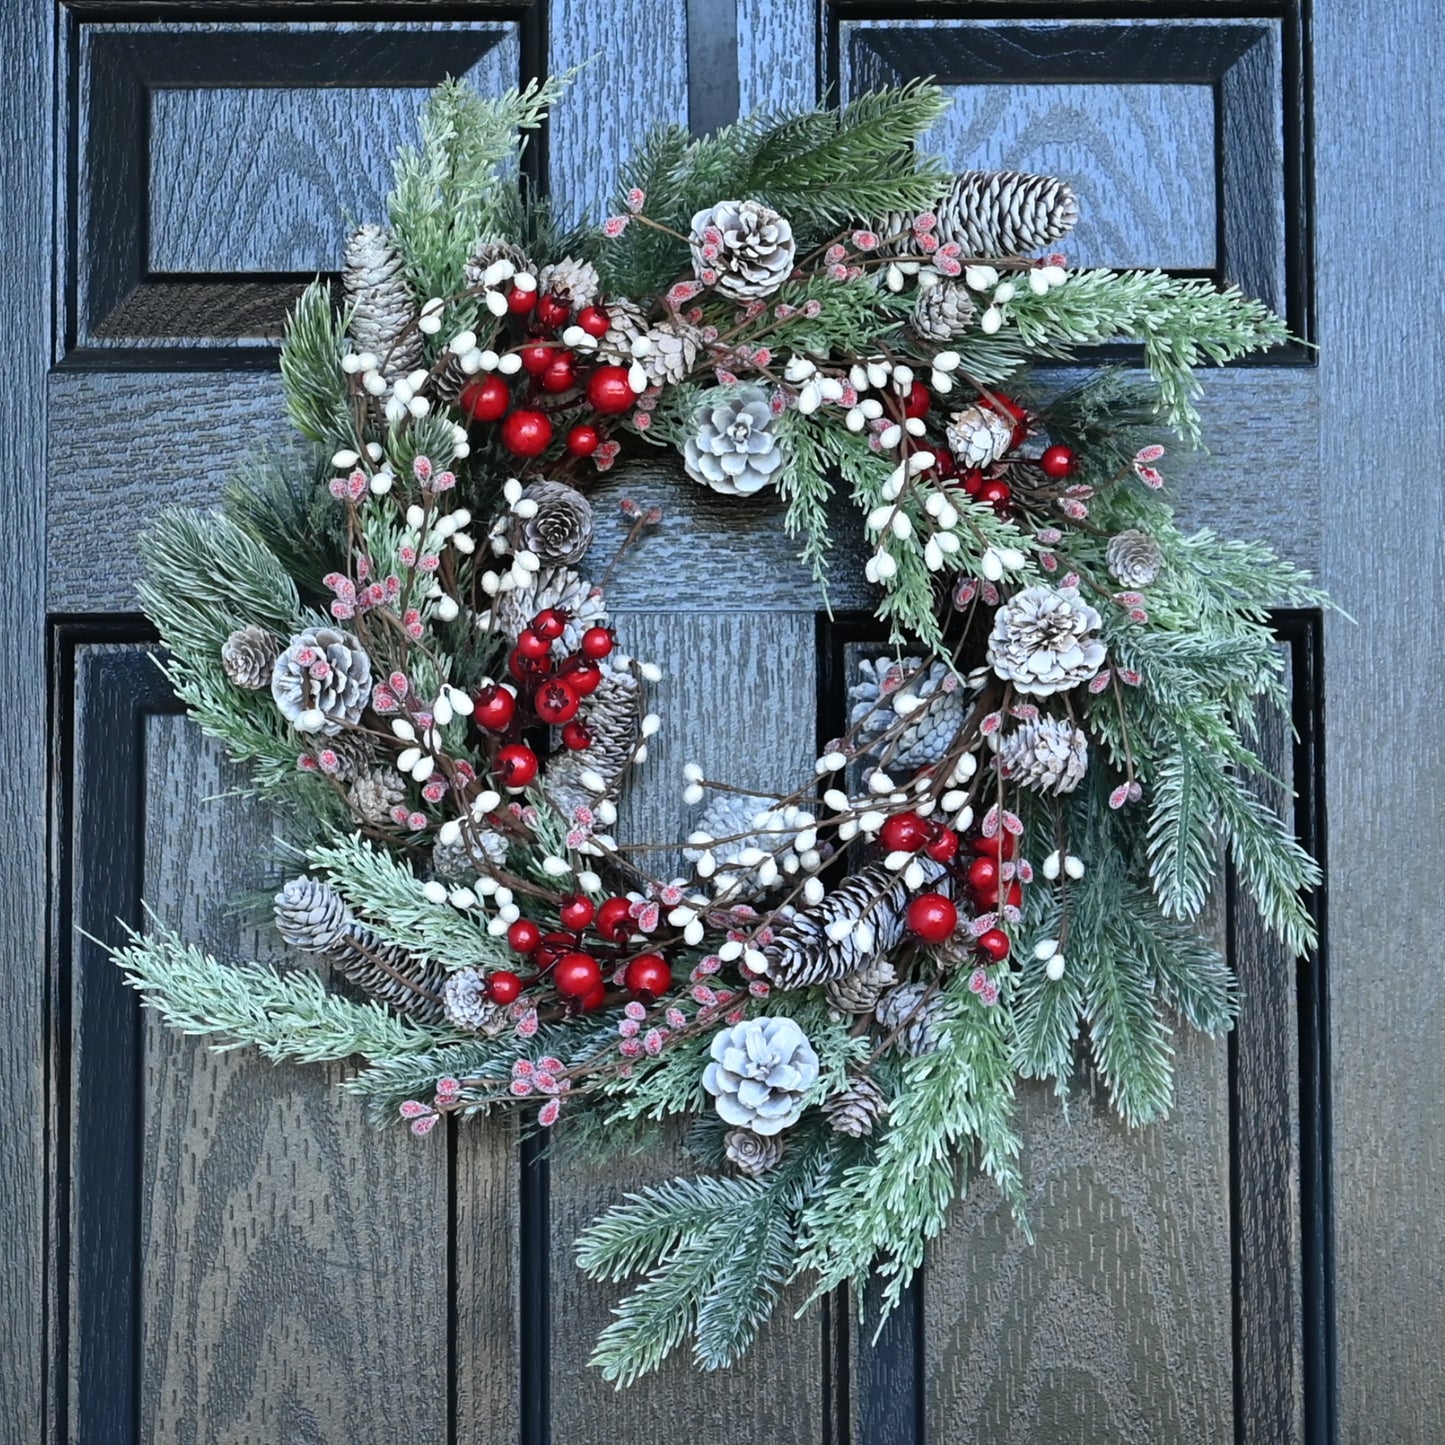 Christmas Wreath for Front Door, 24 inch Winter Wreaths with Natural Pine Cones, Red Berries,Spruce Branches